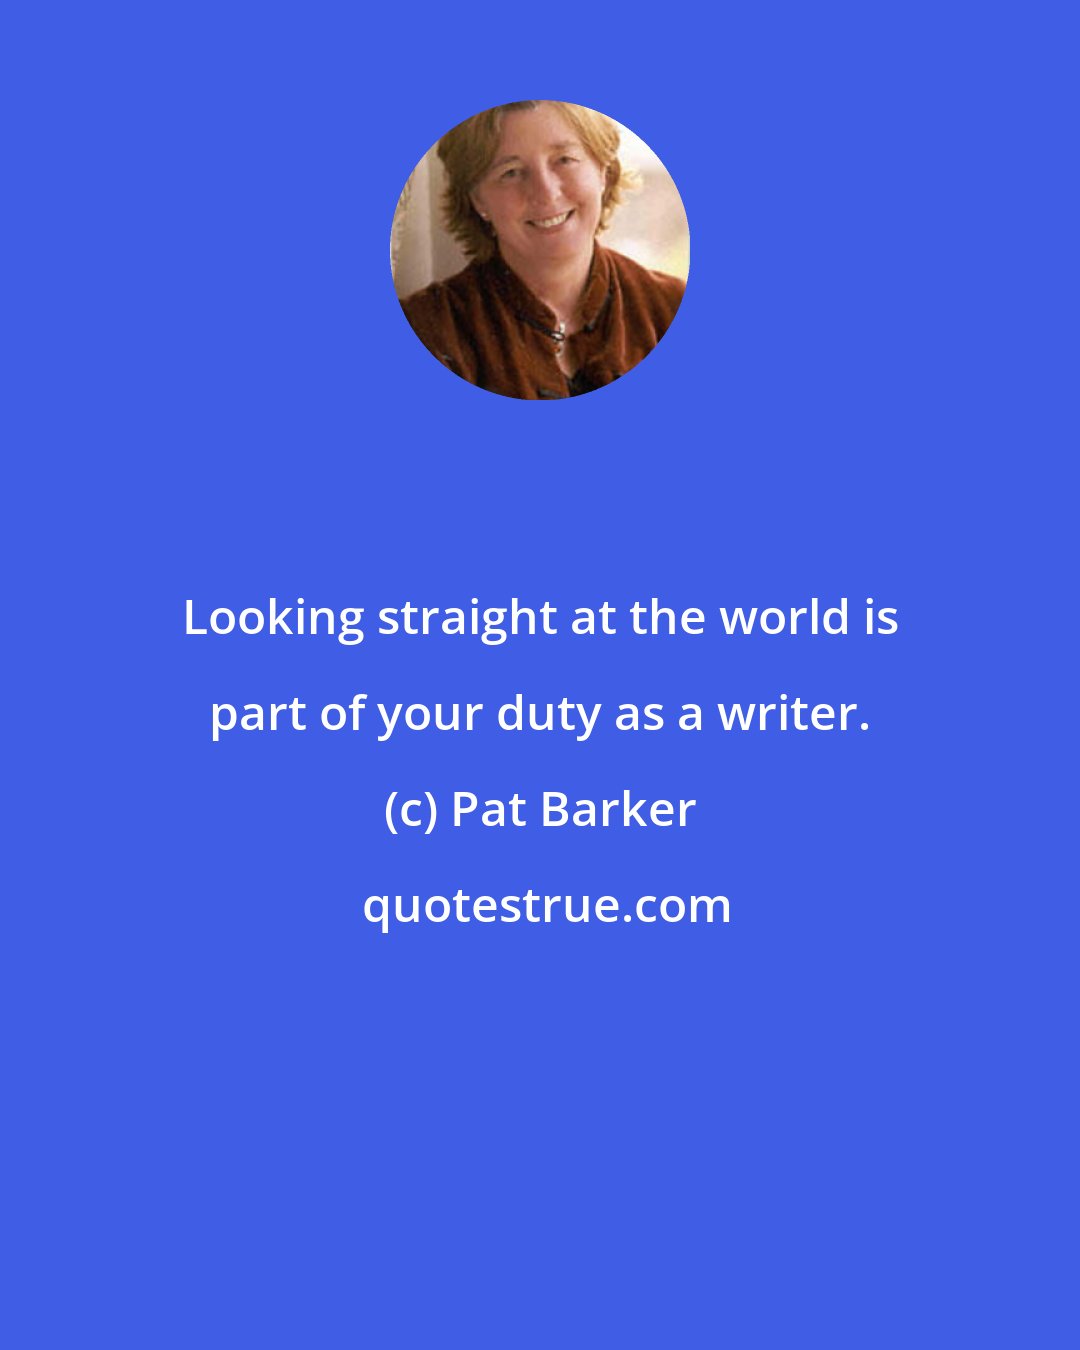 Pat Barker: Looking straight at the world is part of your duty as a writer.